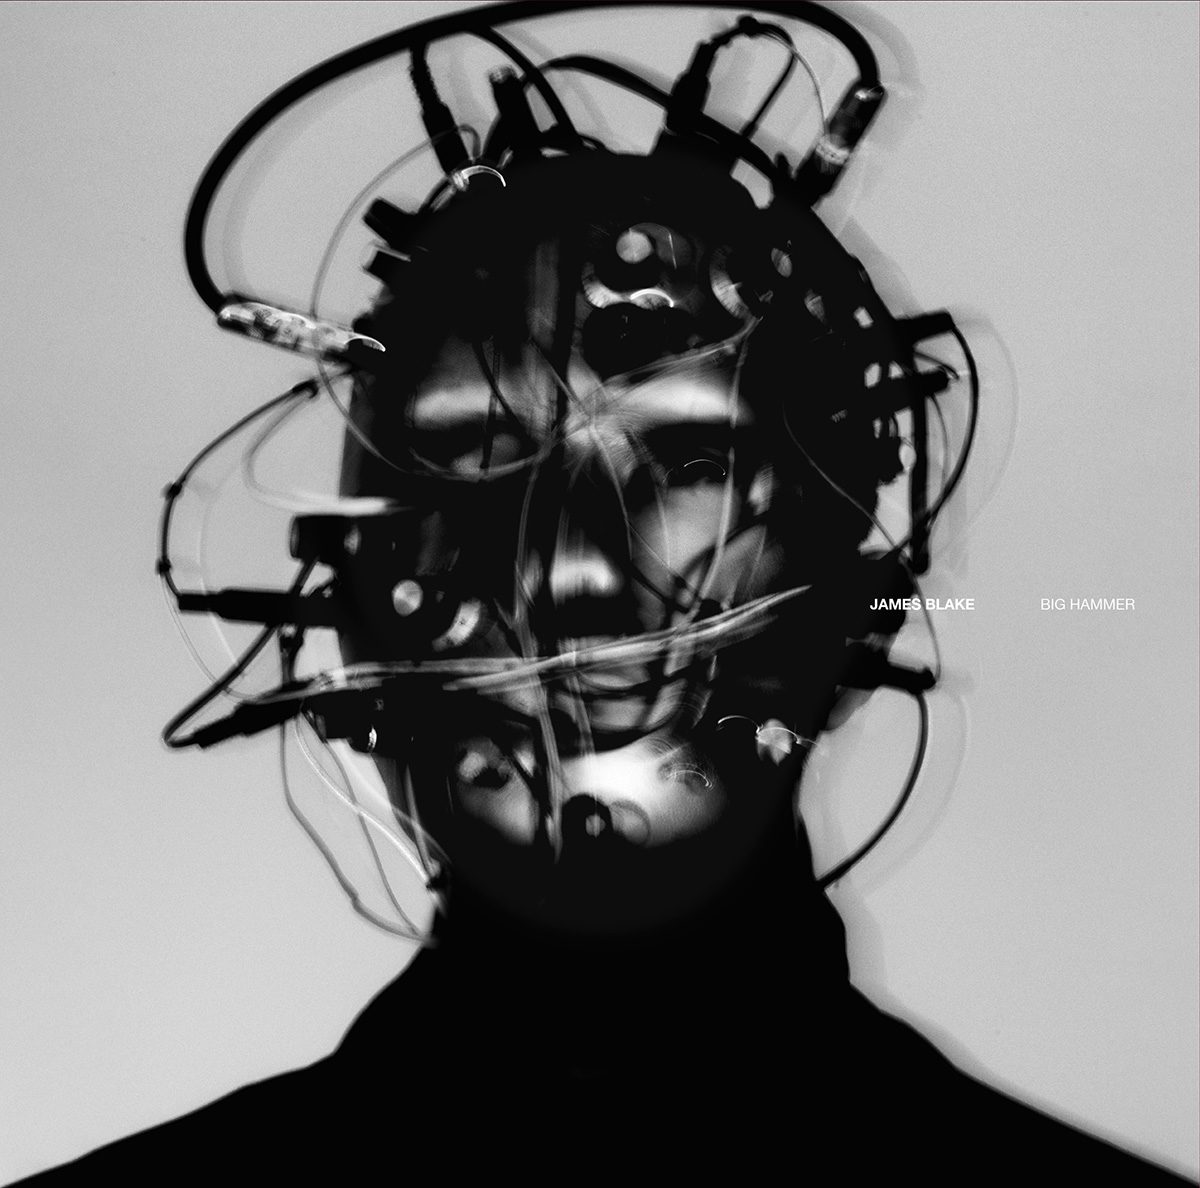 Black and white image of a single artwork from Playing Robots Into Heaven by James Blake, showing the musician wearing headwear covered in cables which appear to be inserted into his head